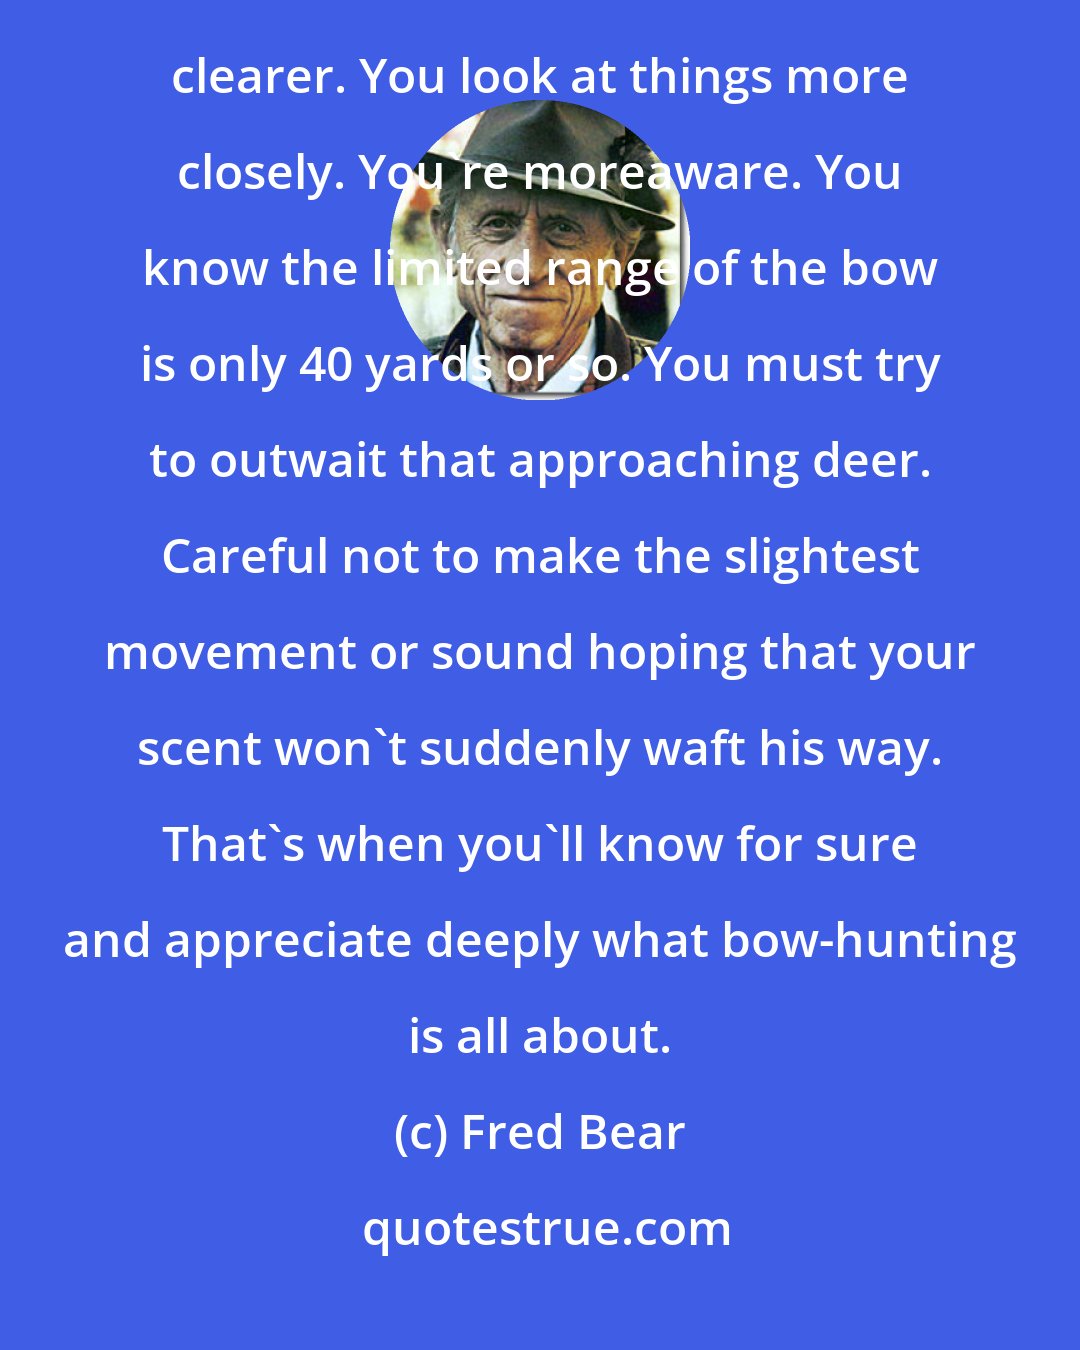 Fred Bear: When bow-hunting, you find you get closer to the woodland critters. The flora and the forest floor becomes clearer. You look at things more closely. You're moreaware. You know the limited range of the bow is only 40 yards or so. You must try to outwait that approaching deer. Careful not to make the slightest movement or sound hoping that your scent won't suddenly waft his way. That's when you'll know for sure and appreciate deeply what bow-hunting is all about.